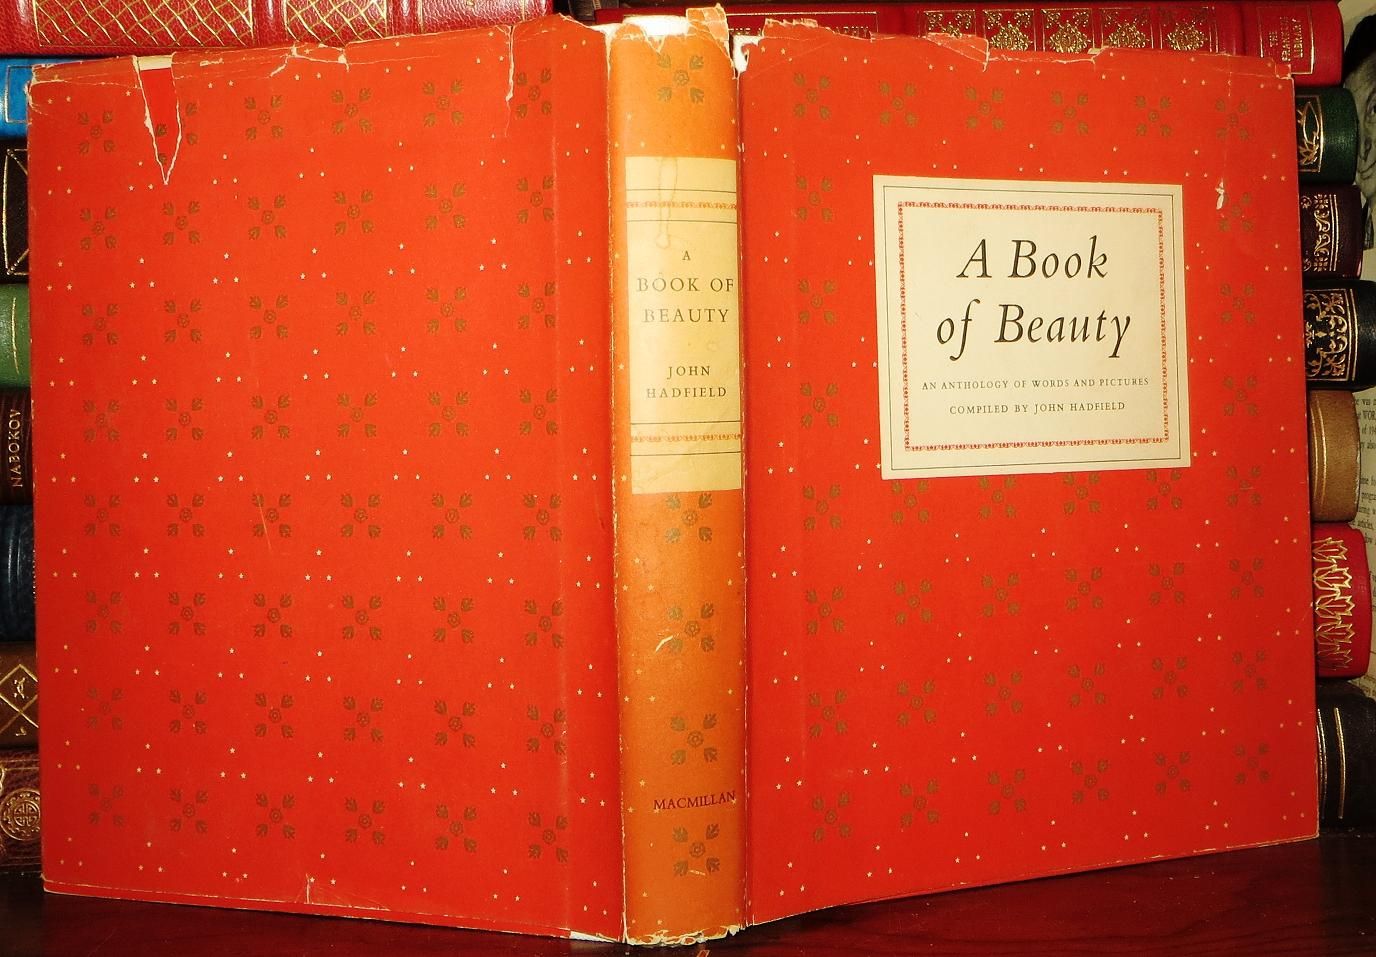 HADFIELD, JOHN, COMPILED BY - A Book of Beauty an Anthology of Words and Pictures